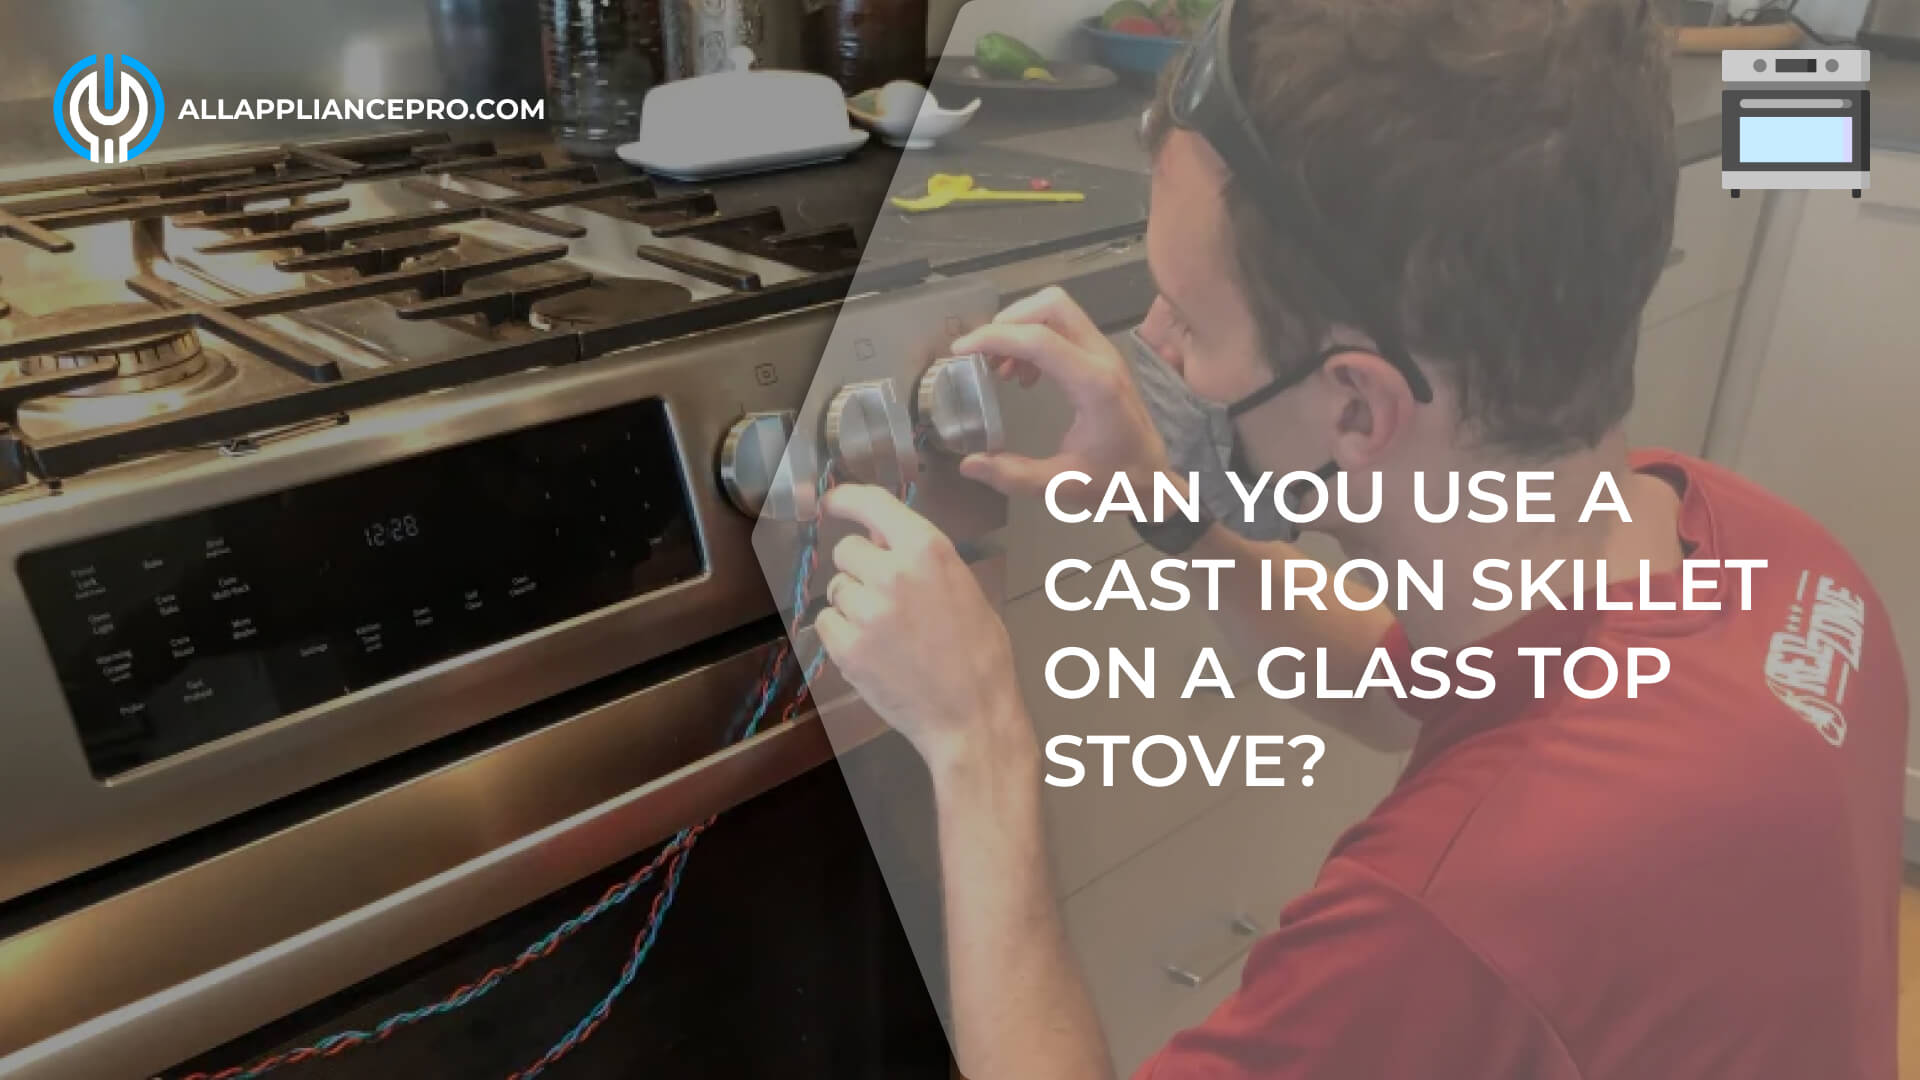 Can You Use a Cast Iron Skillet on a Glass Top Stove?